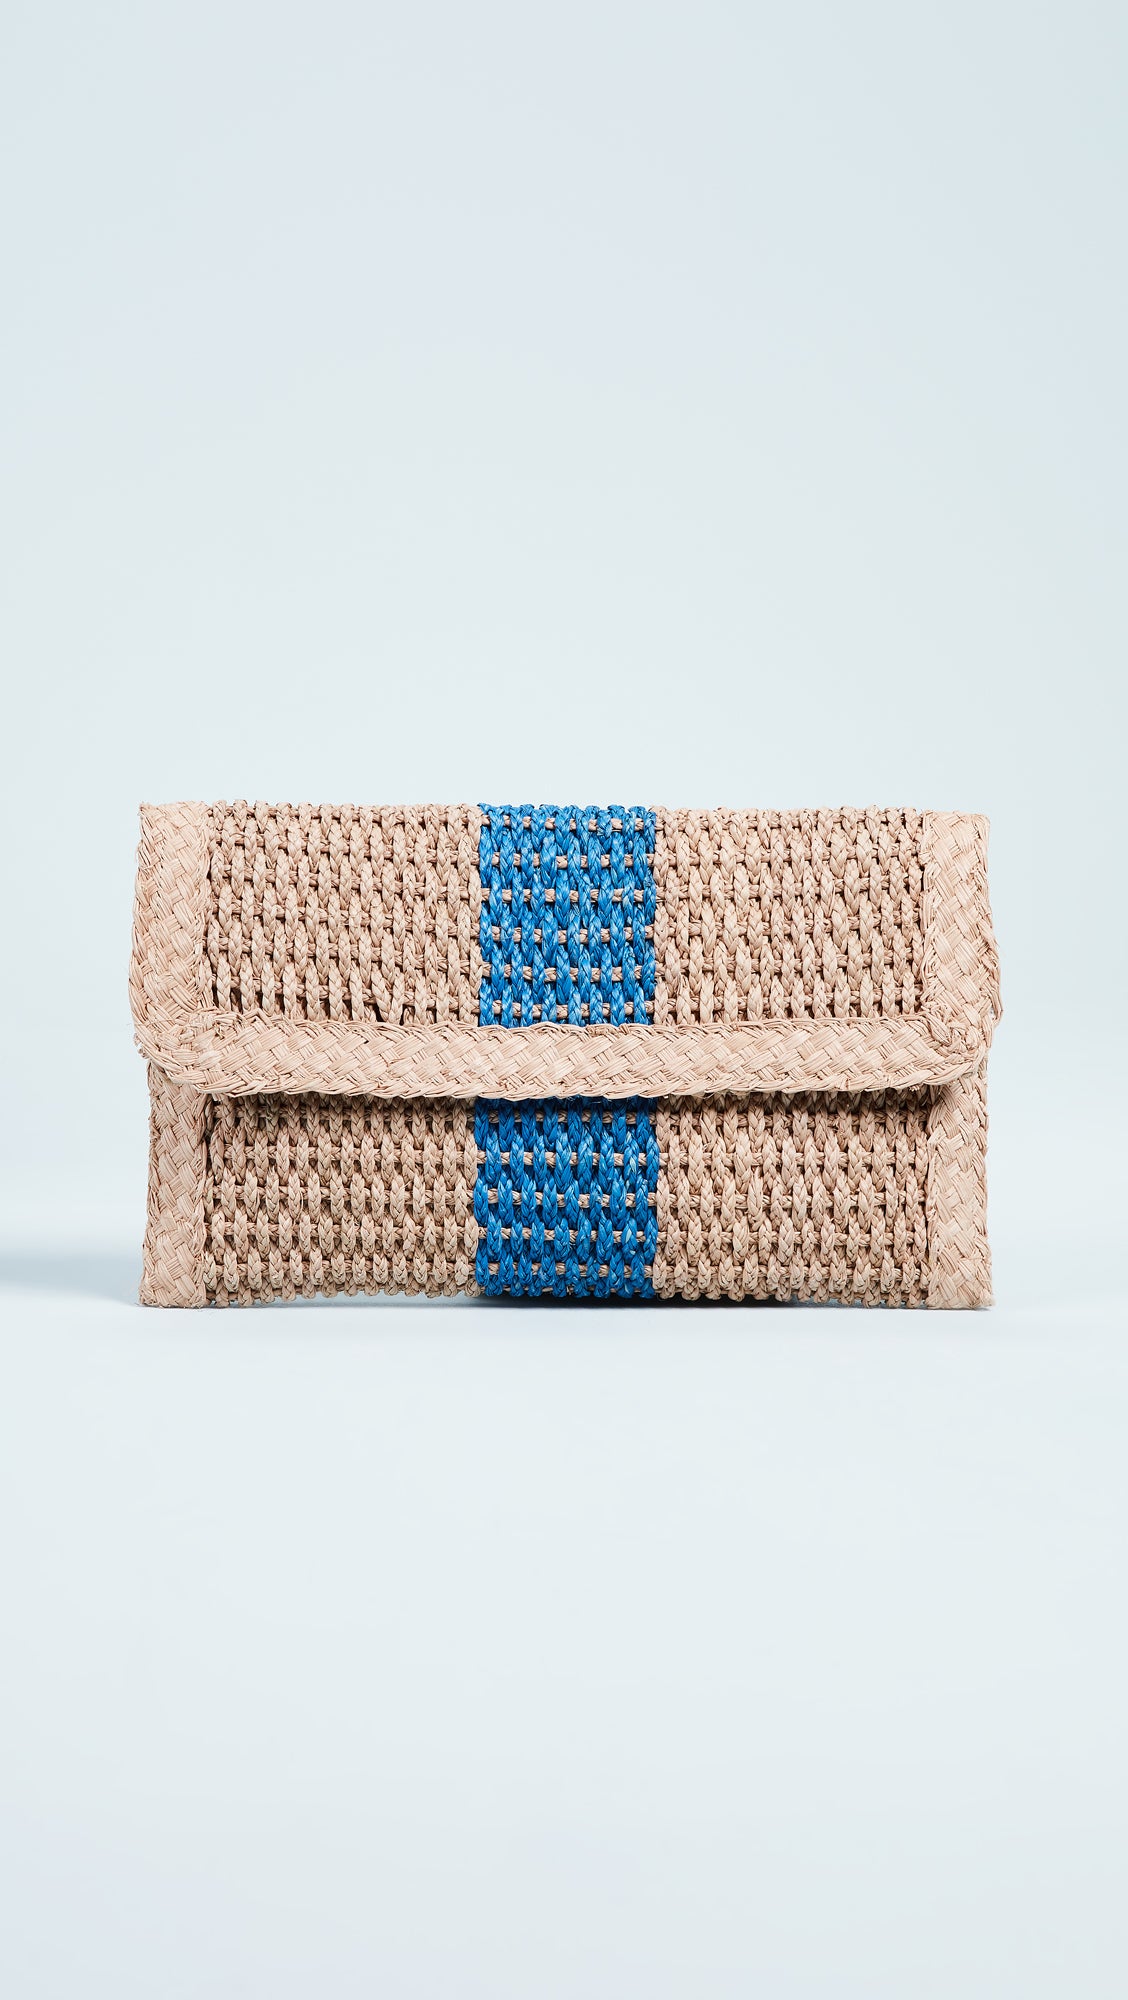 Bali Cobalt Clutch from Kaanas Spring 2018. This straw KAANAS clutch is a great blend of casual and sophisticated, with a tidy shape and a wide contrast stripe. Fabric: Woven straw. Magnetic closure at front. Lined. Sporty straw bag. Measurements Length: 10.5" Width: 6" 